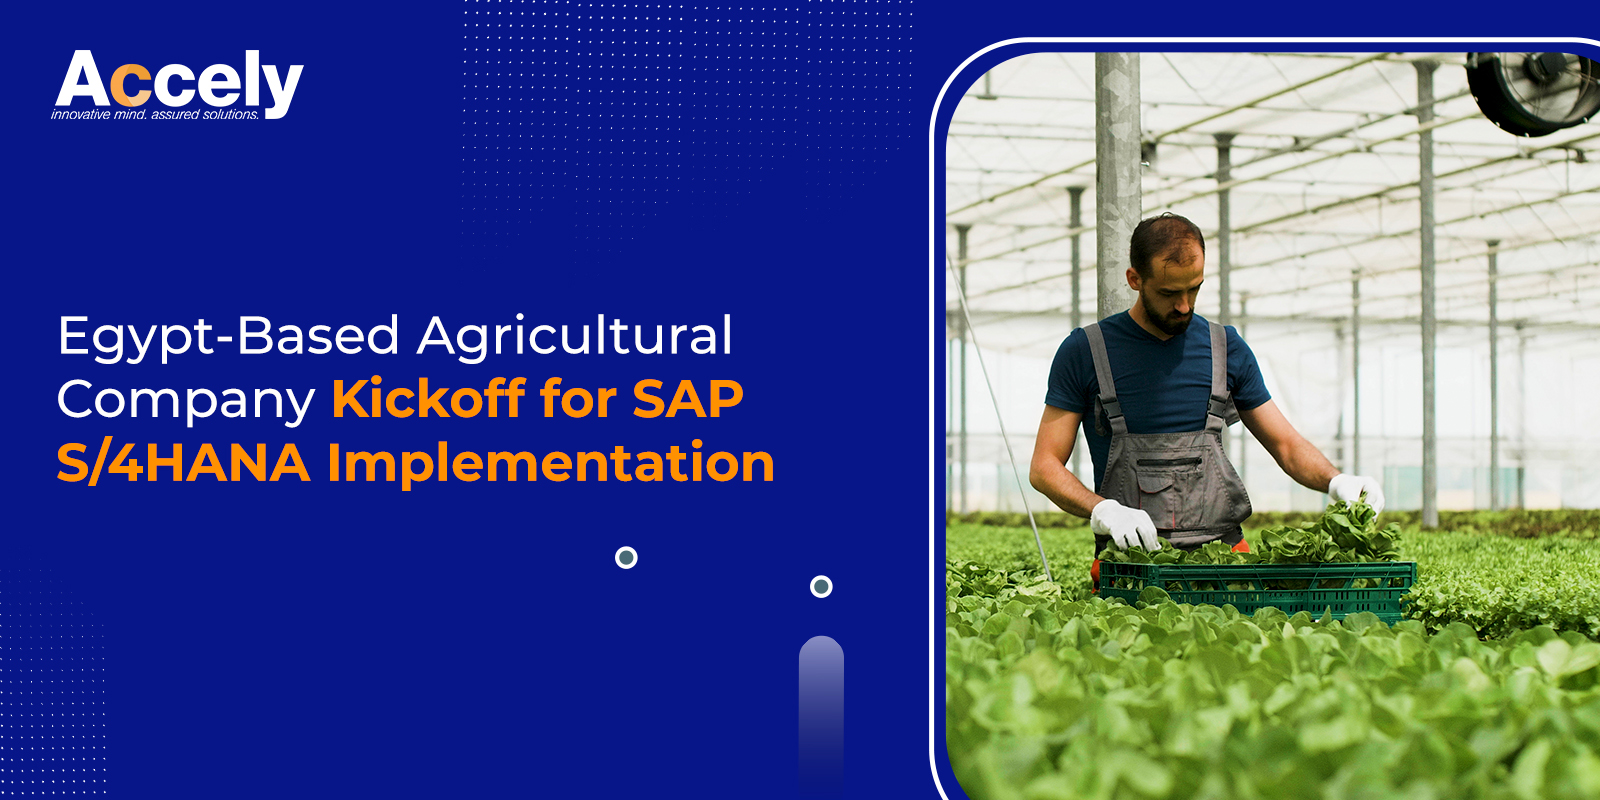 Egypt-Based Agricultural Company Kickoff for SAP S/4HANA Implementation